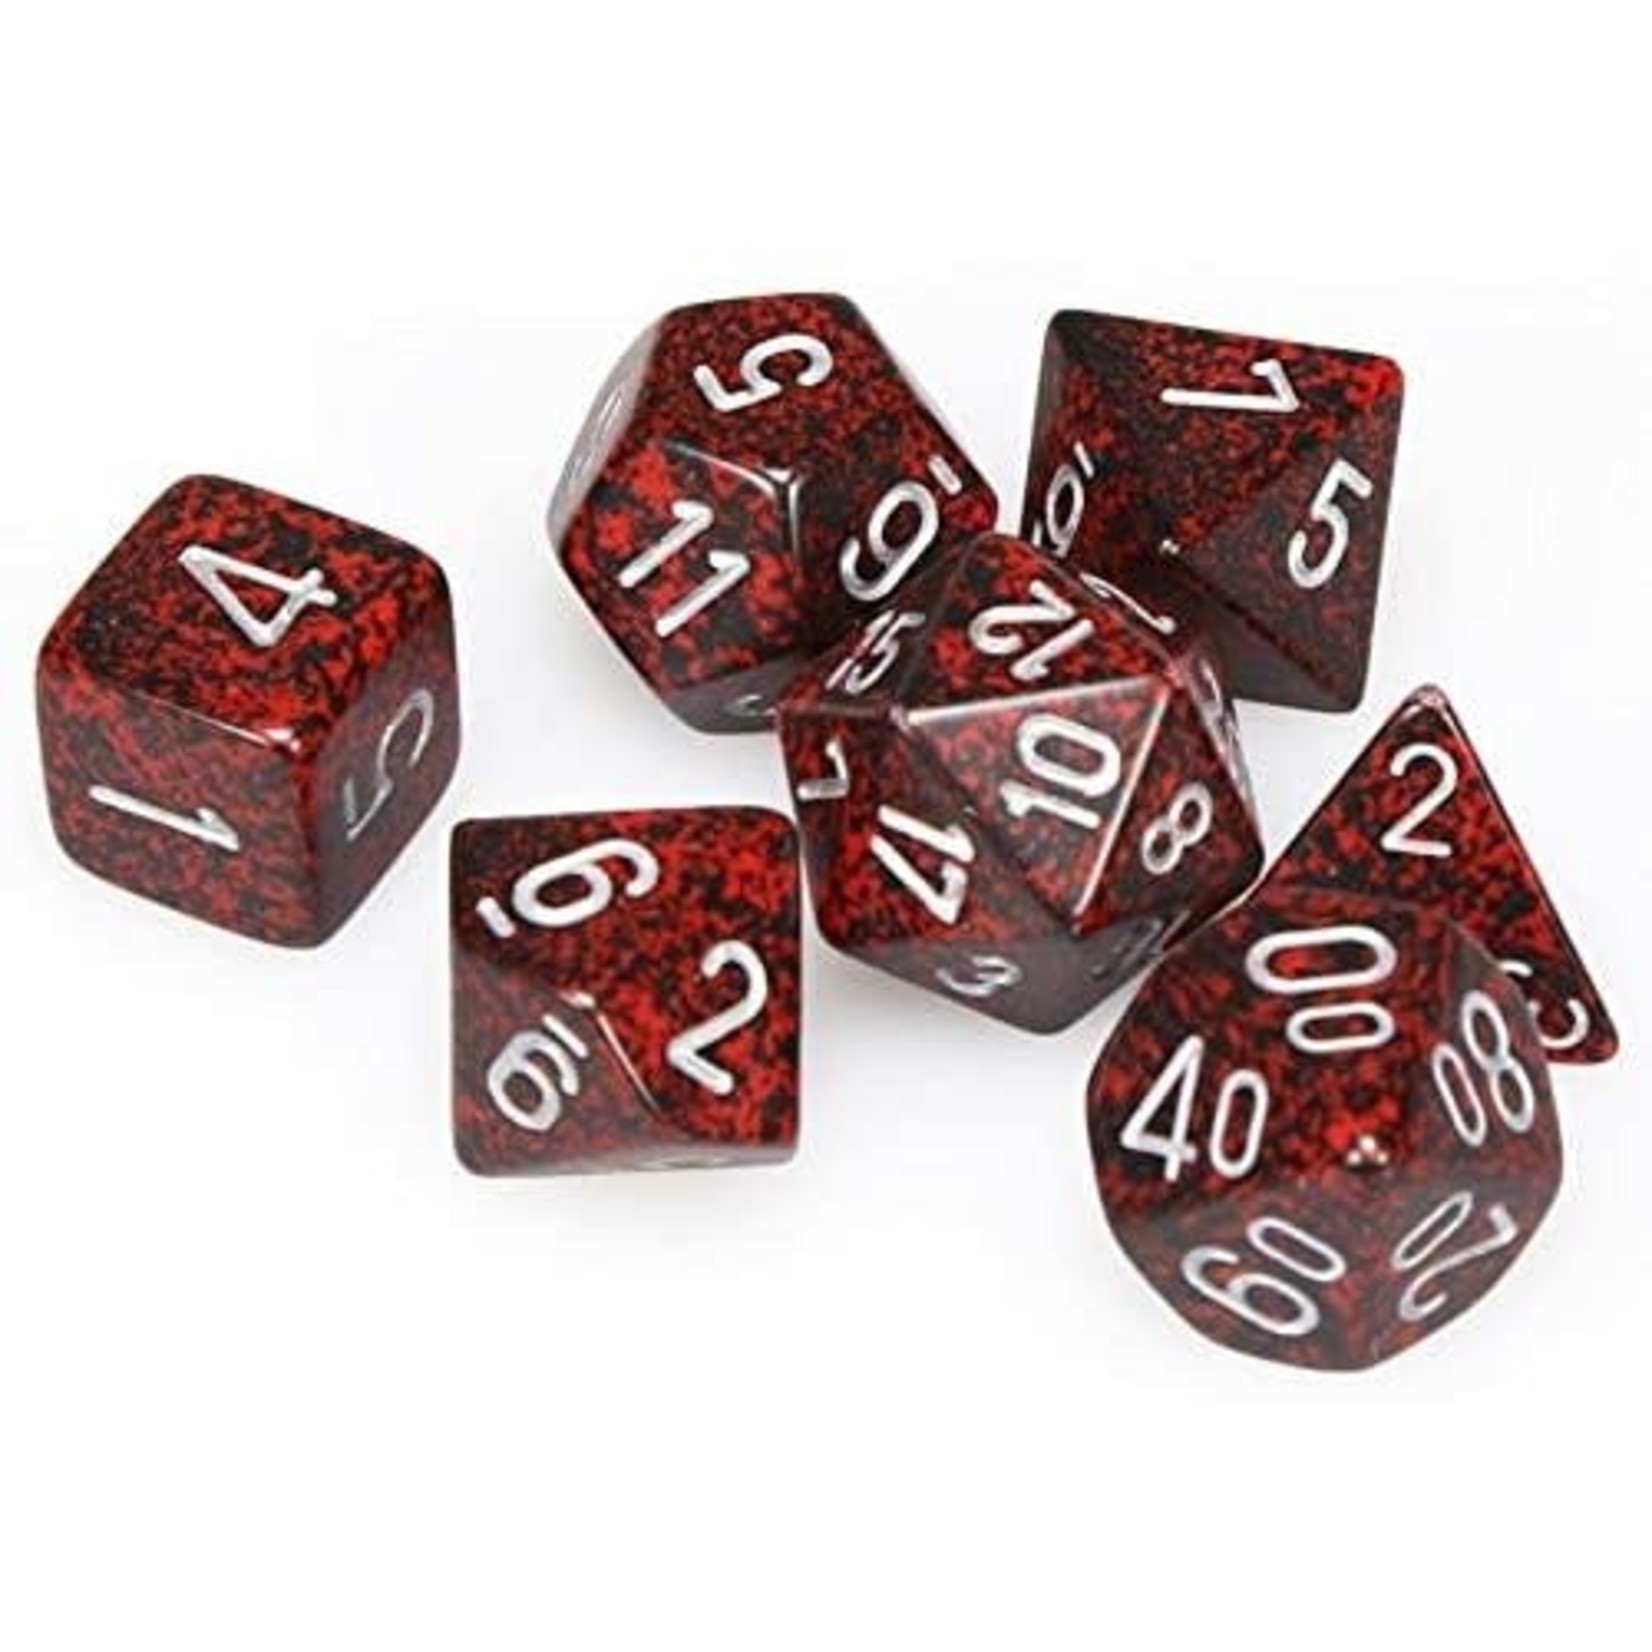 Silver Volcano Speckled Dice Set